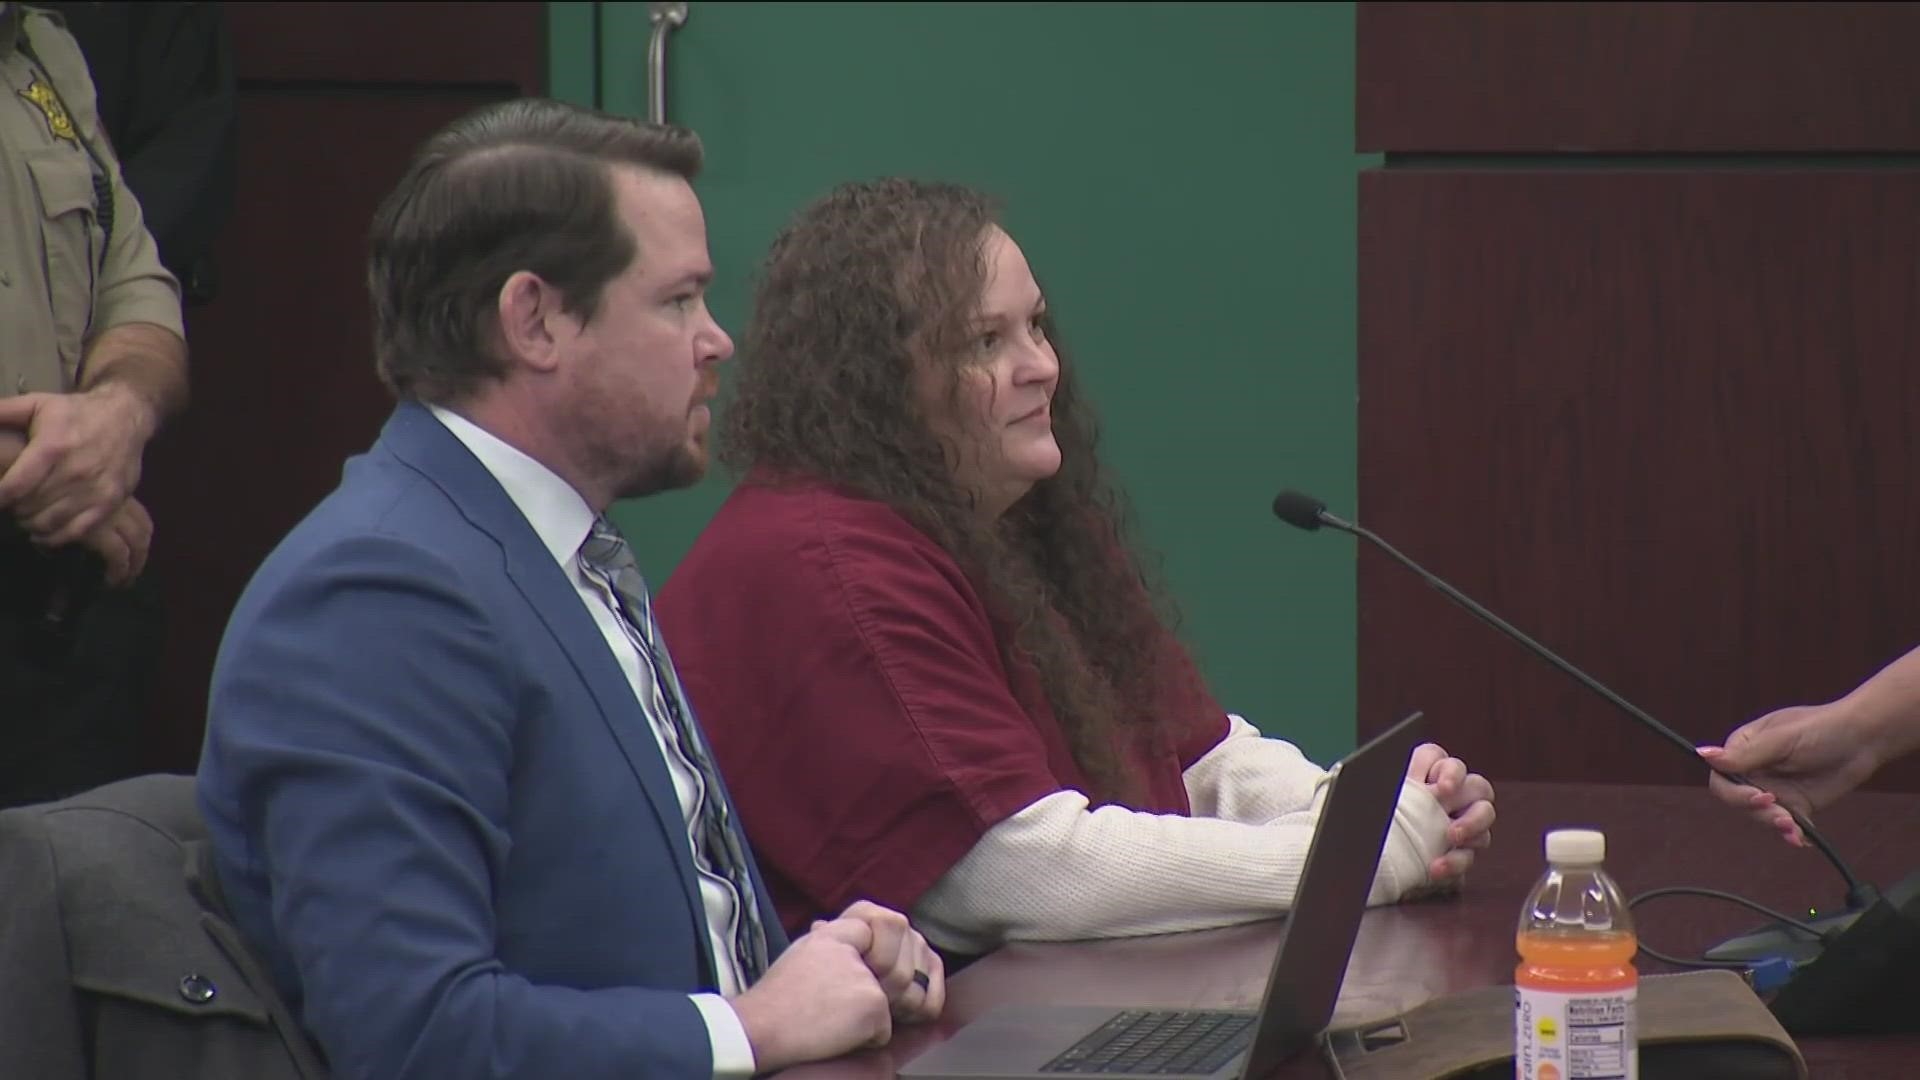 Fieramusca was sentenced for the murder of Heidi Broussard and the kidnapping of her baby in 2019. KVUE's Senior Reporter Tony Plohetski explains.